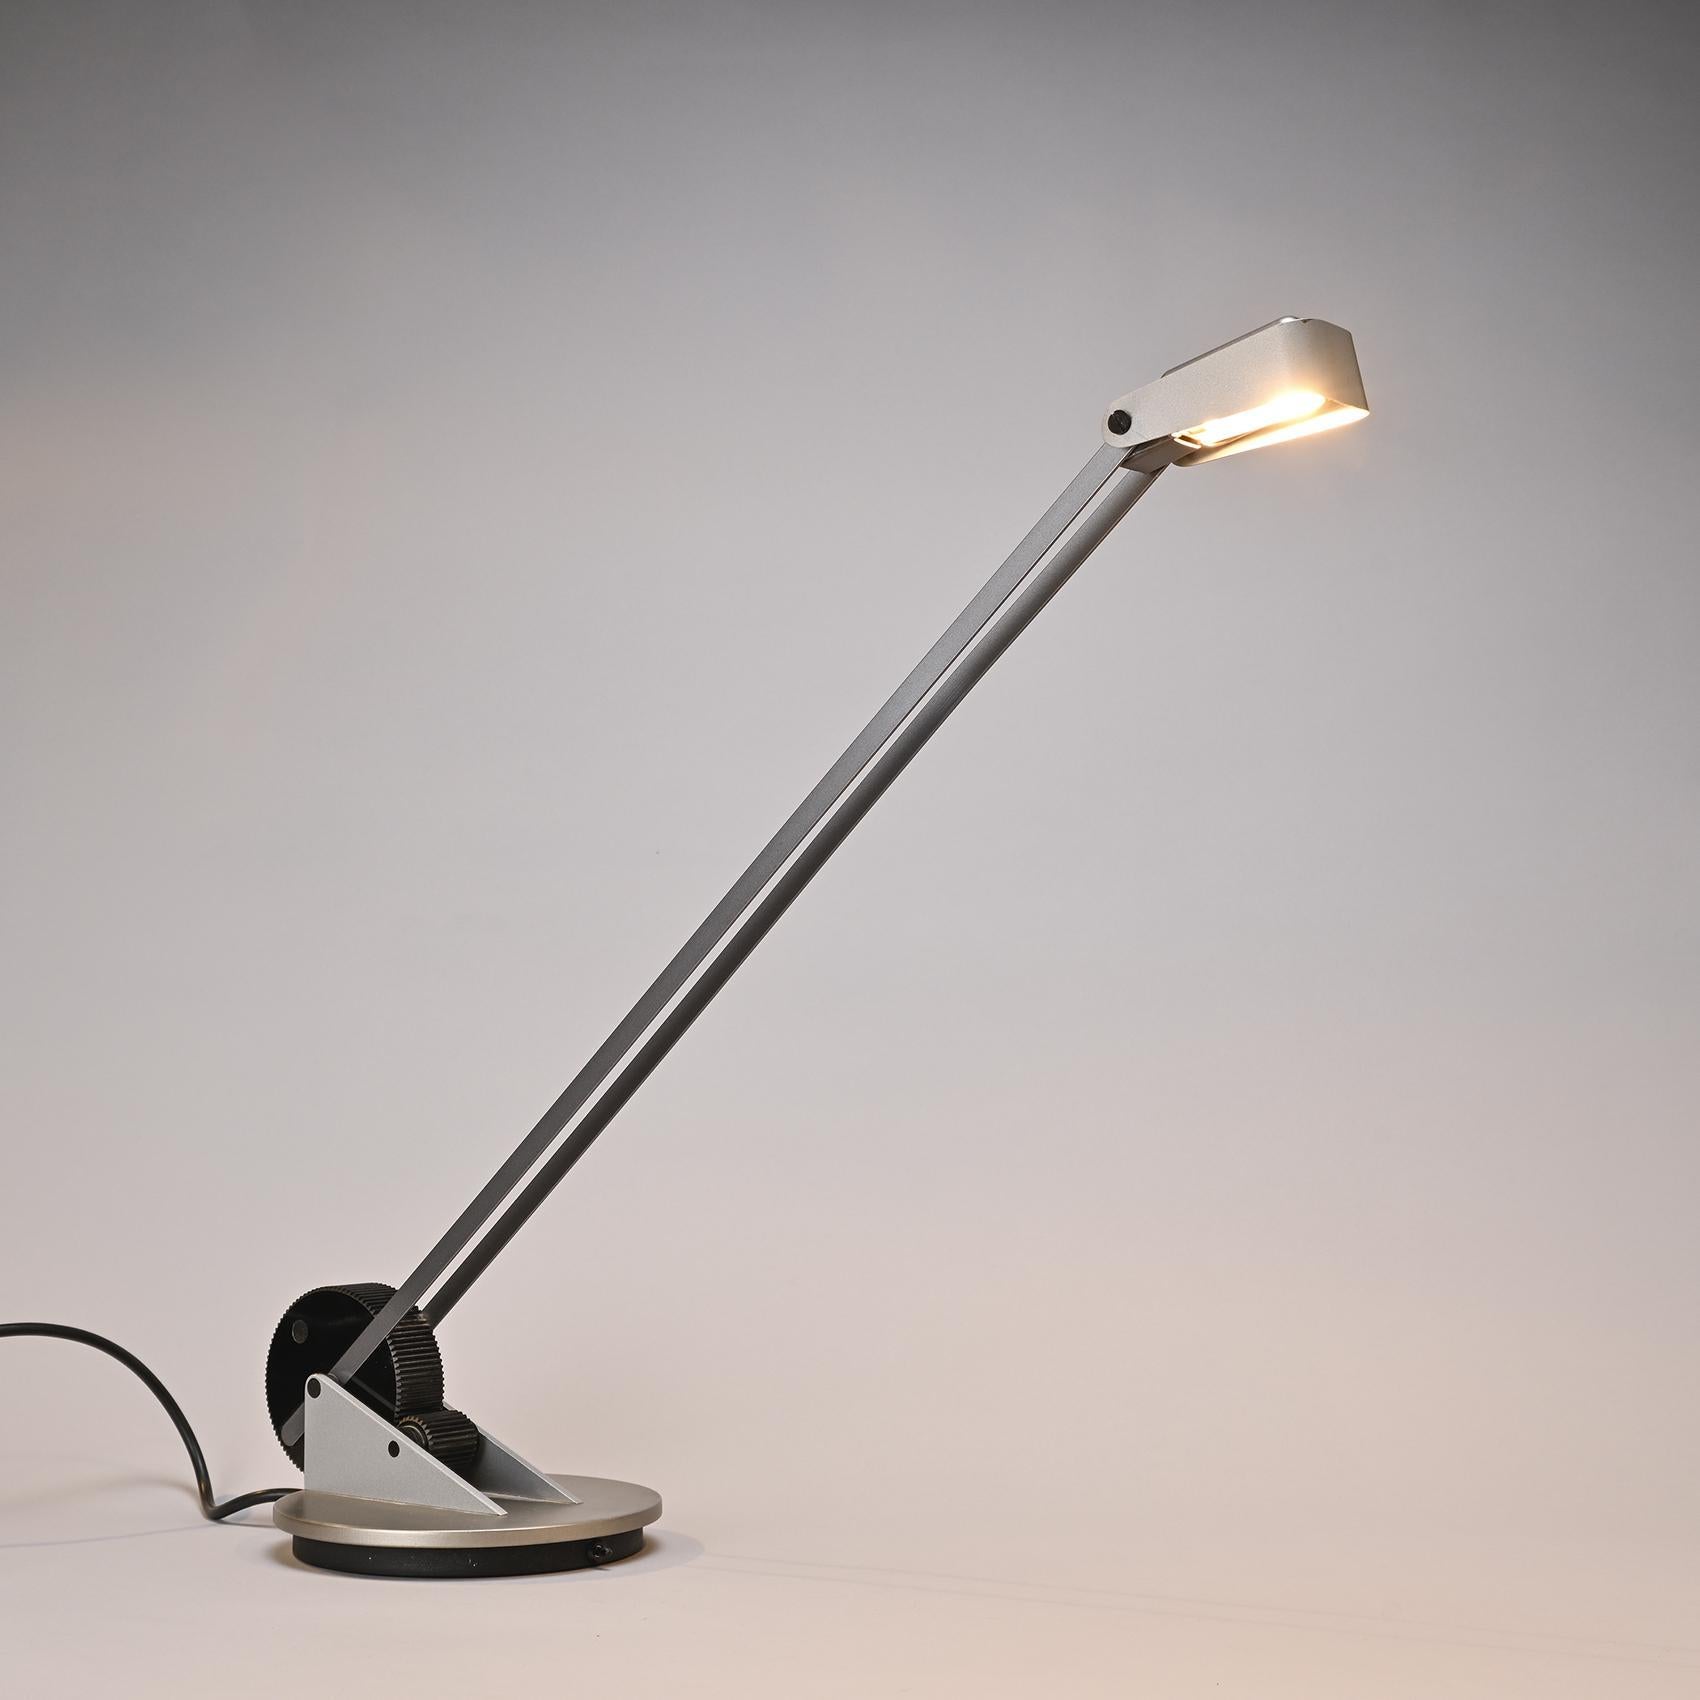 Rare table lamp, model Meccanica, designed by the Italian designer Michele de Lucchi.

The circular base supports two arms holding a pivoting reflector, crafted from gray lacquered metal;

Manufacturer : Belux, circa 1986.

Produced in Wohlen,